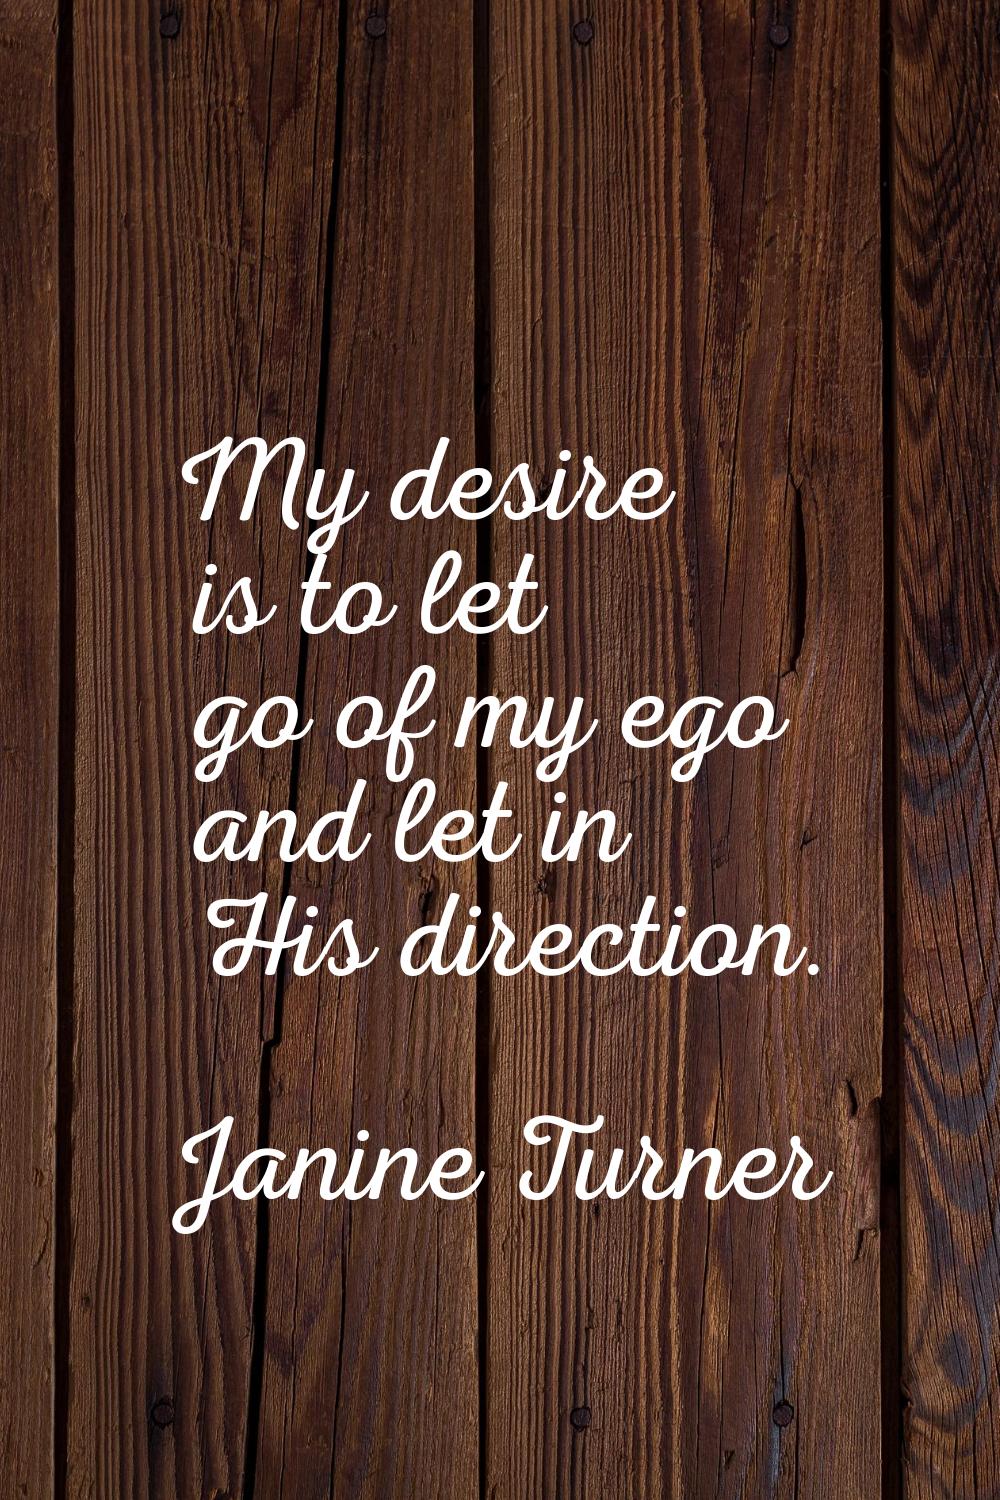 My desire is to let go of my ego and let in His direction.